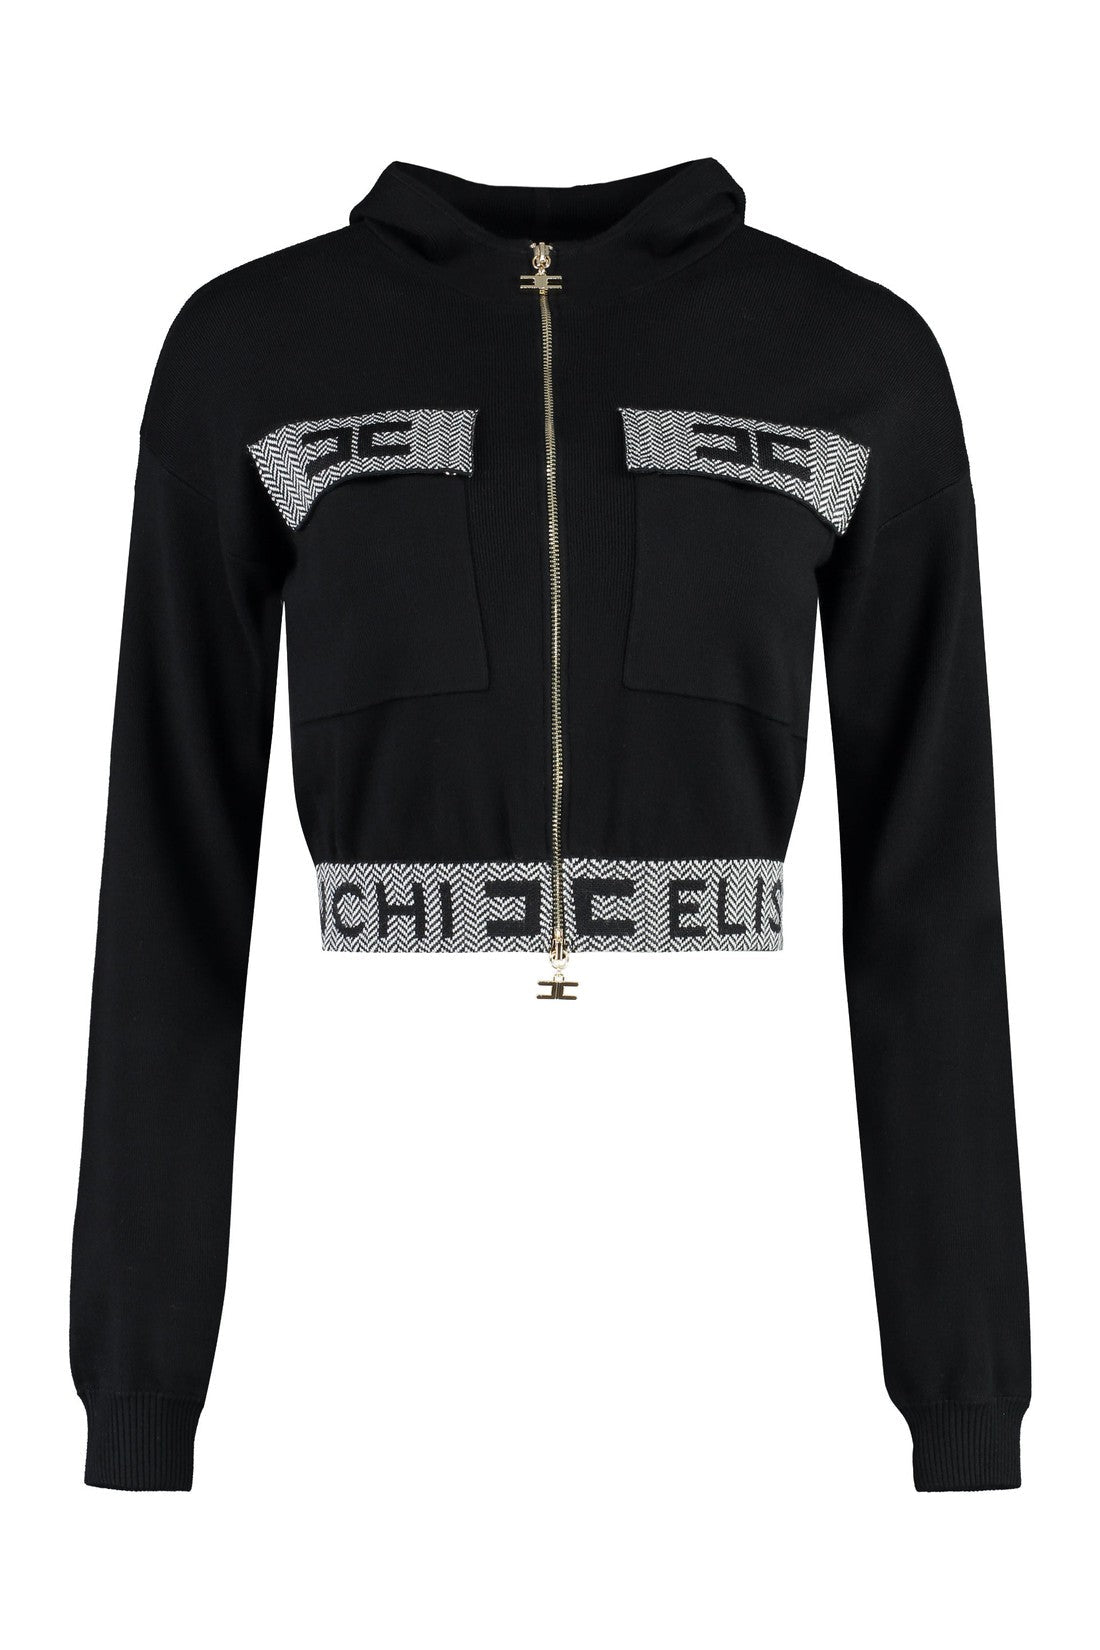 Elisabetta Franchi-OUTLET-SALE-Knitted full zip hoodie-ARCHIVIST